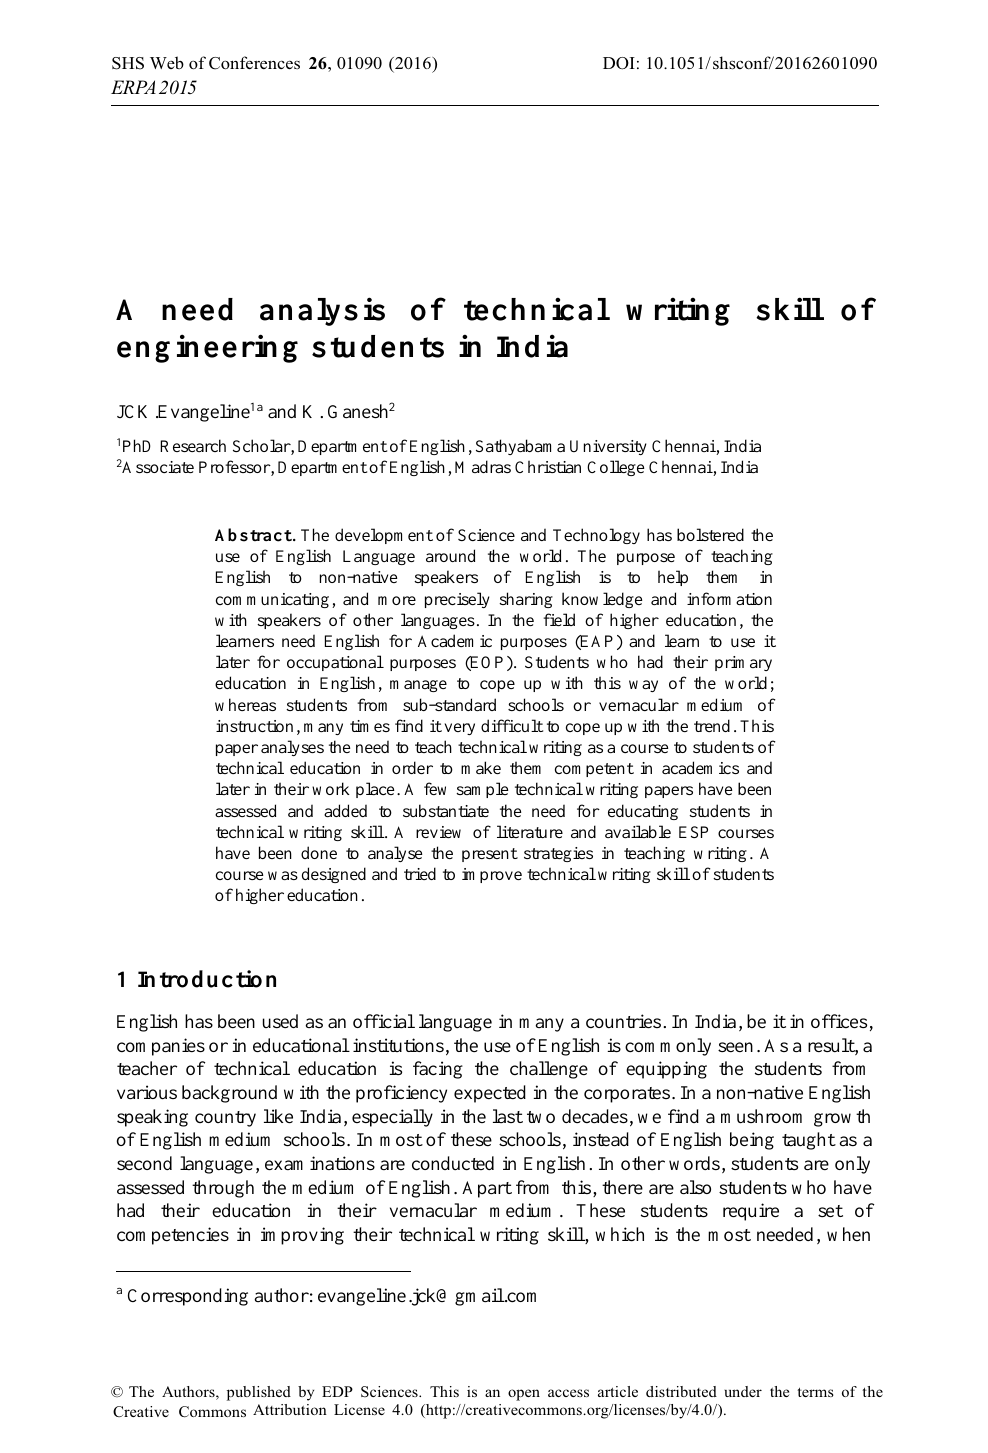 A need analysis of technical writing skill of engineering students